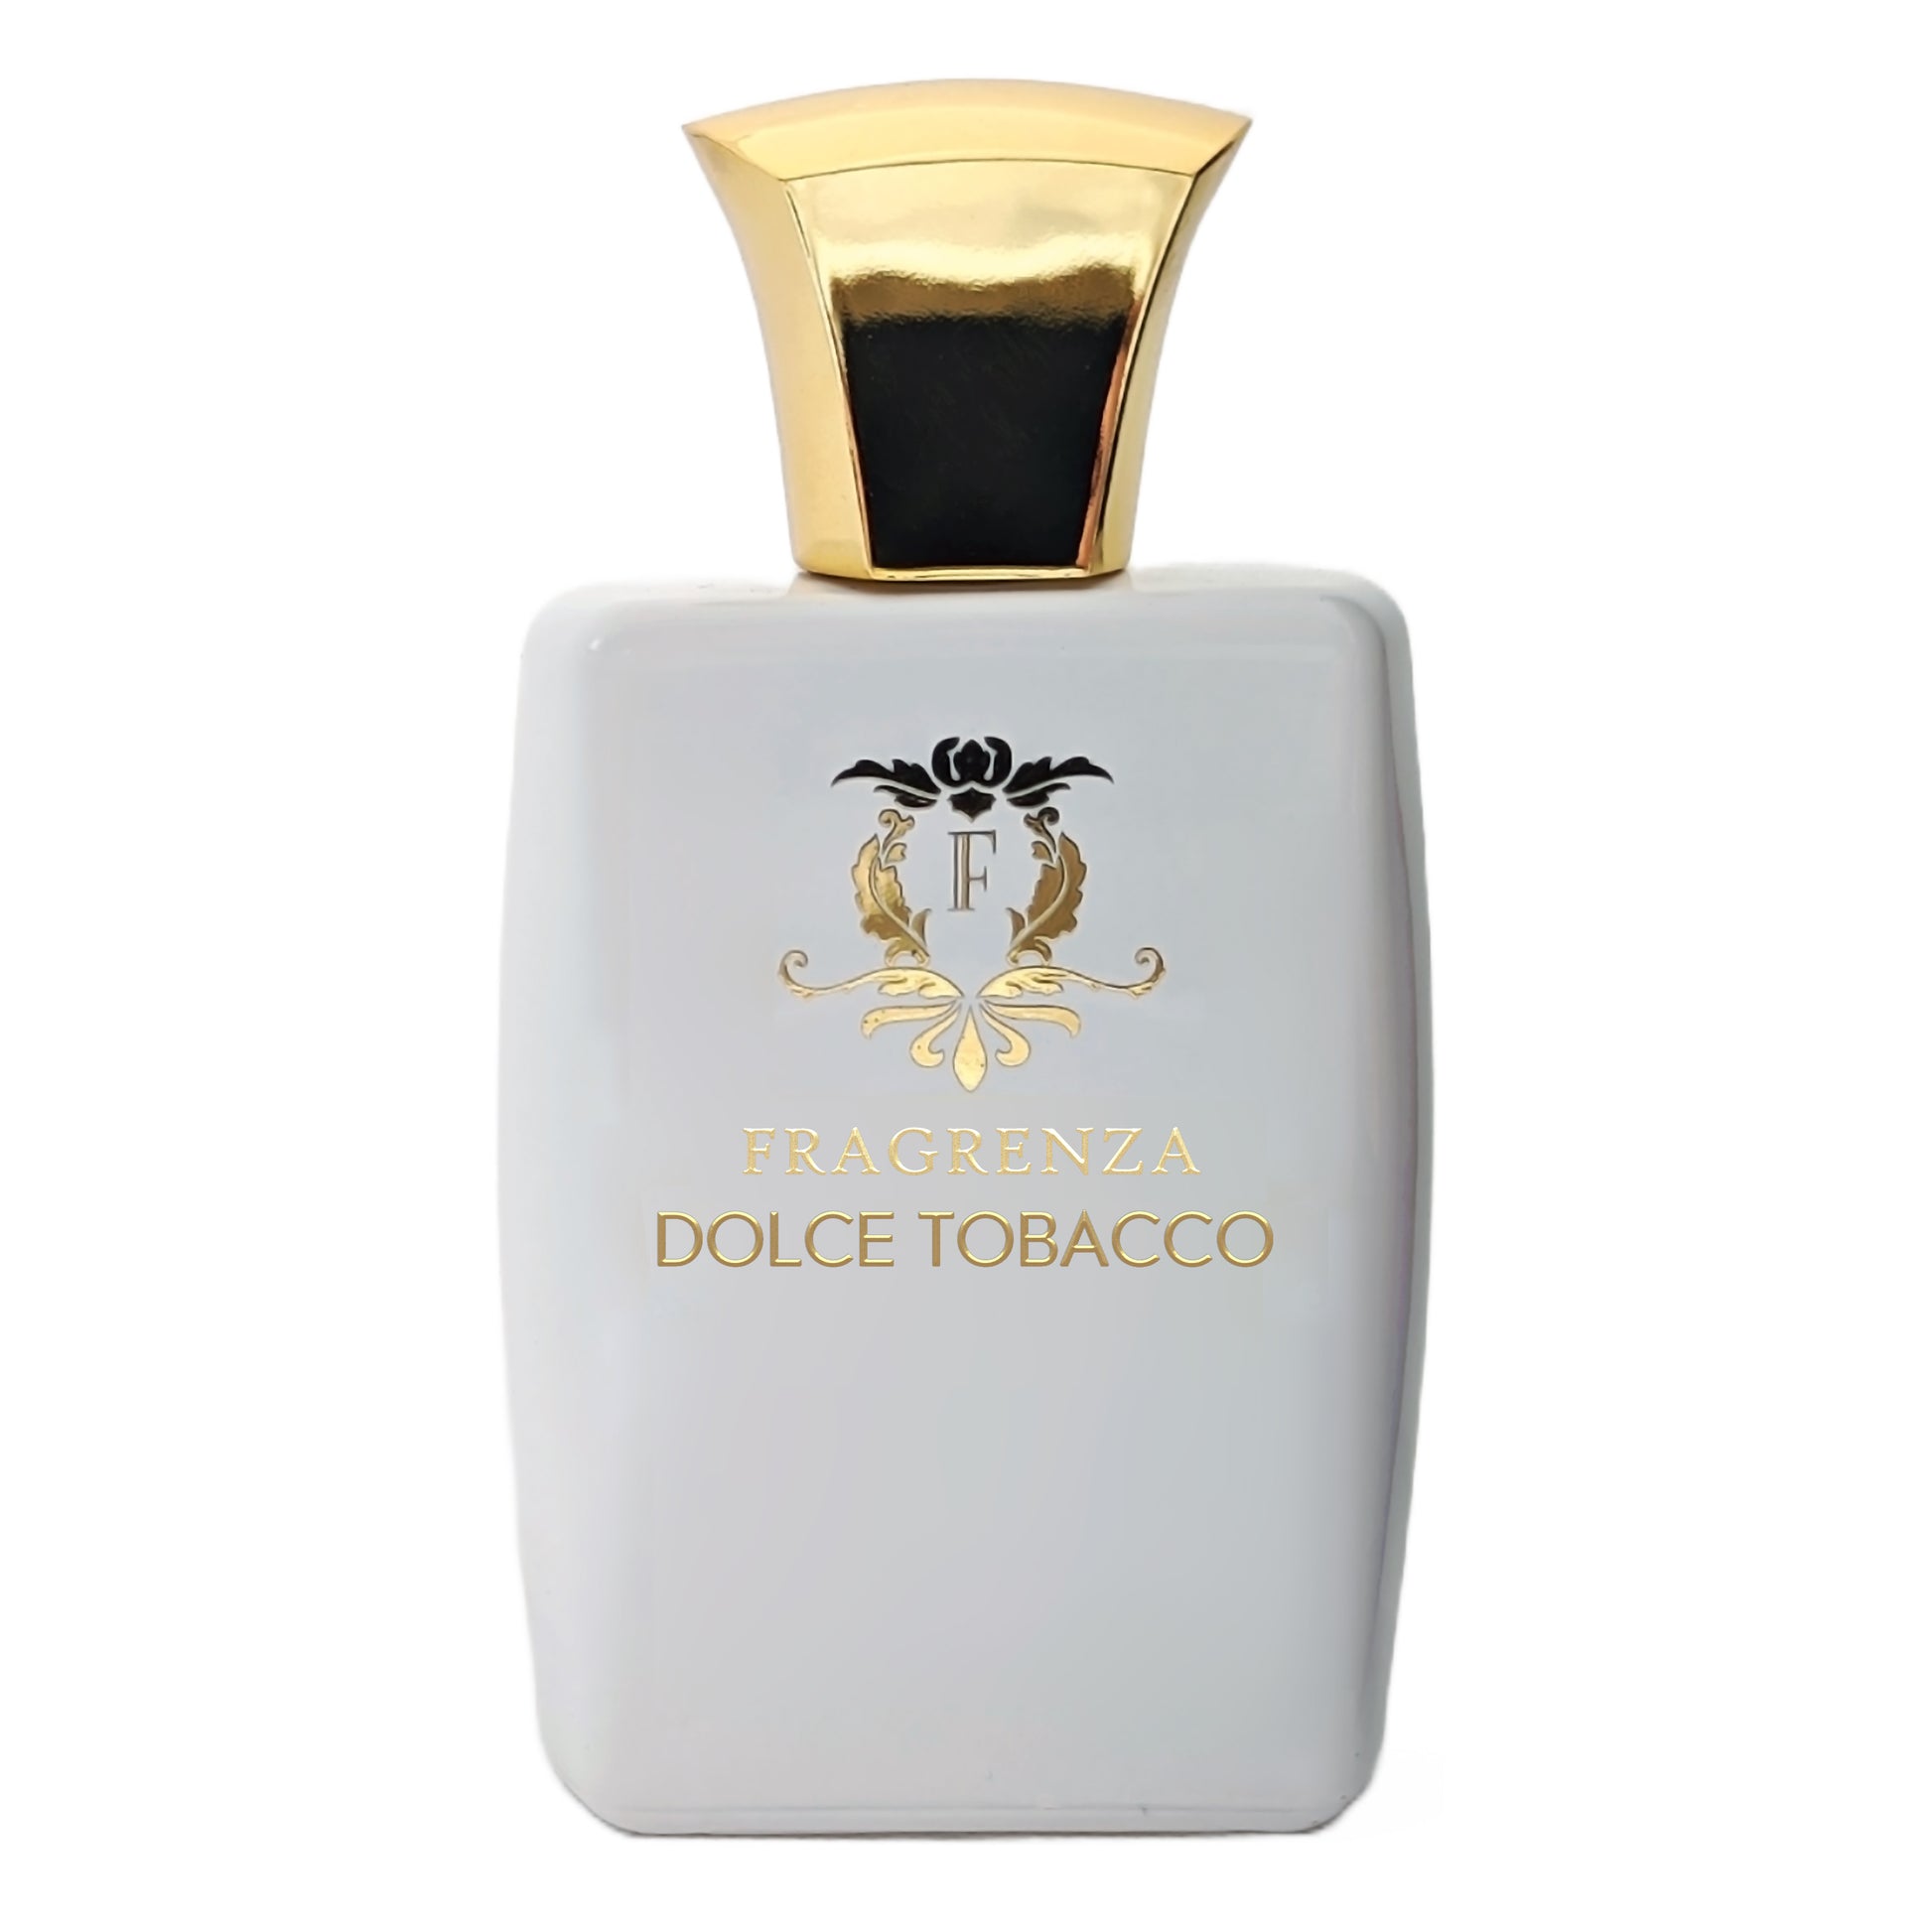 Dolce Tobacco dupe